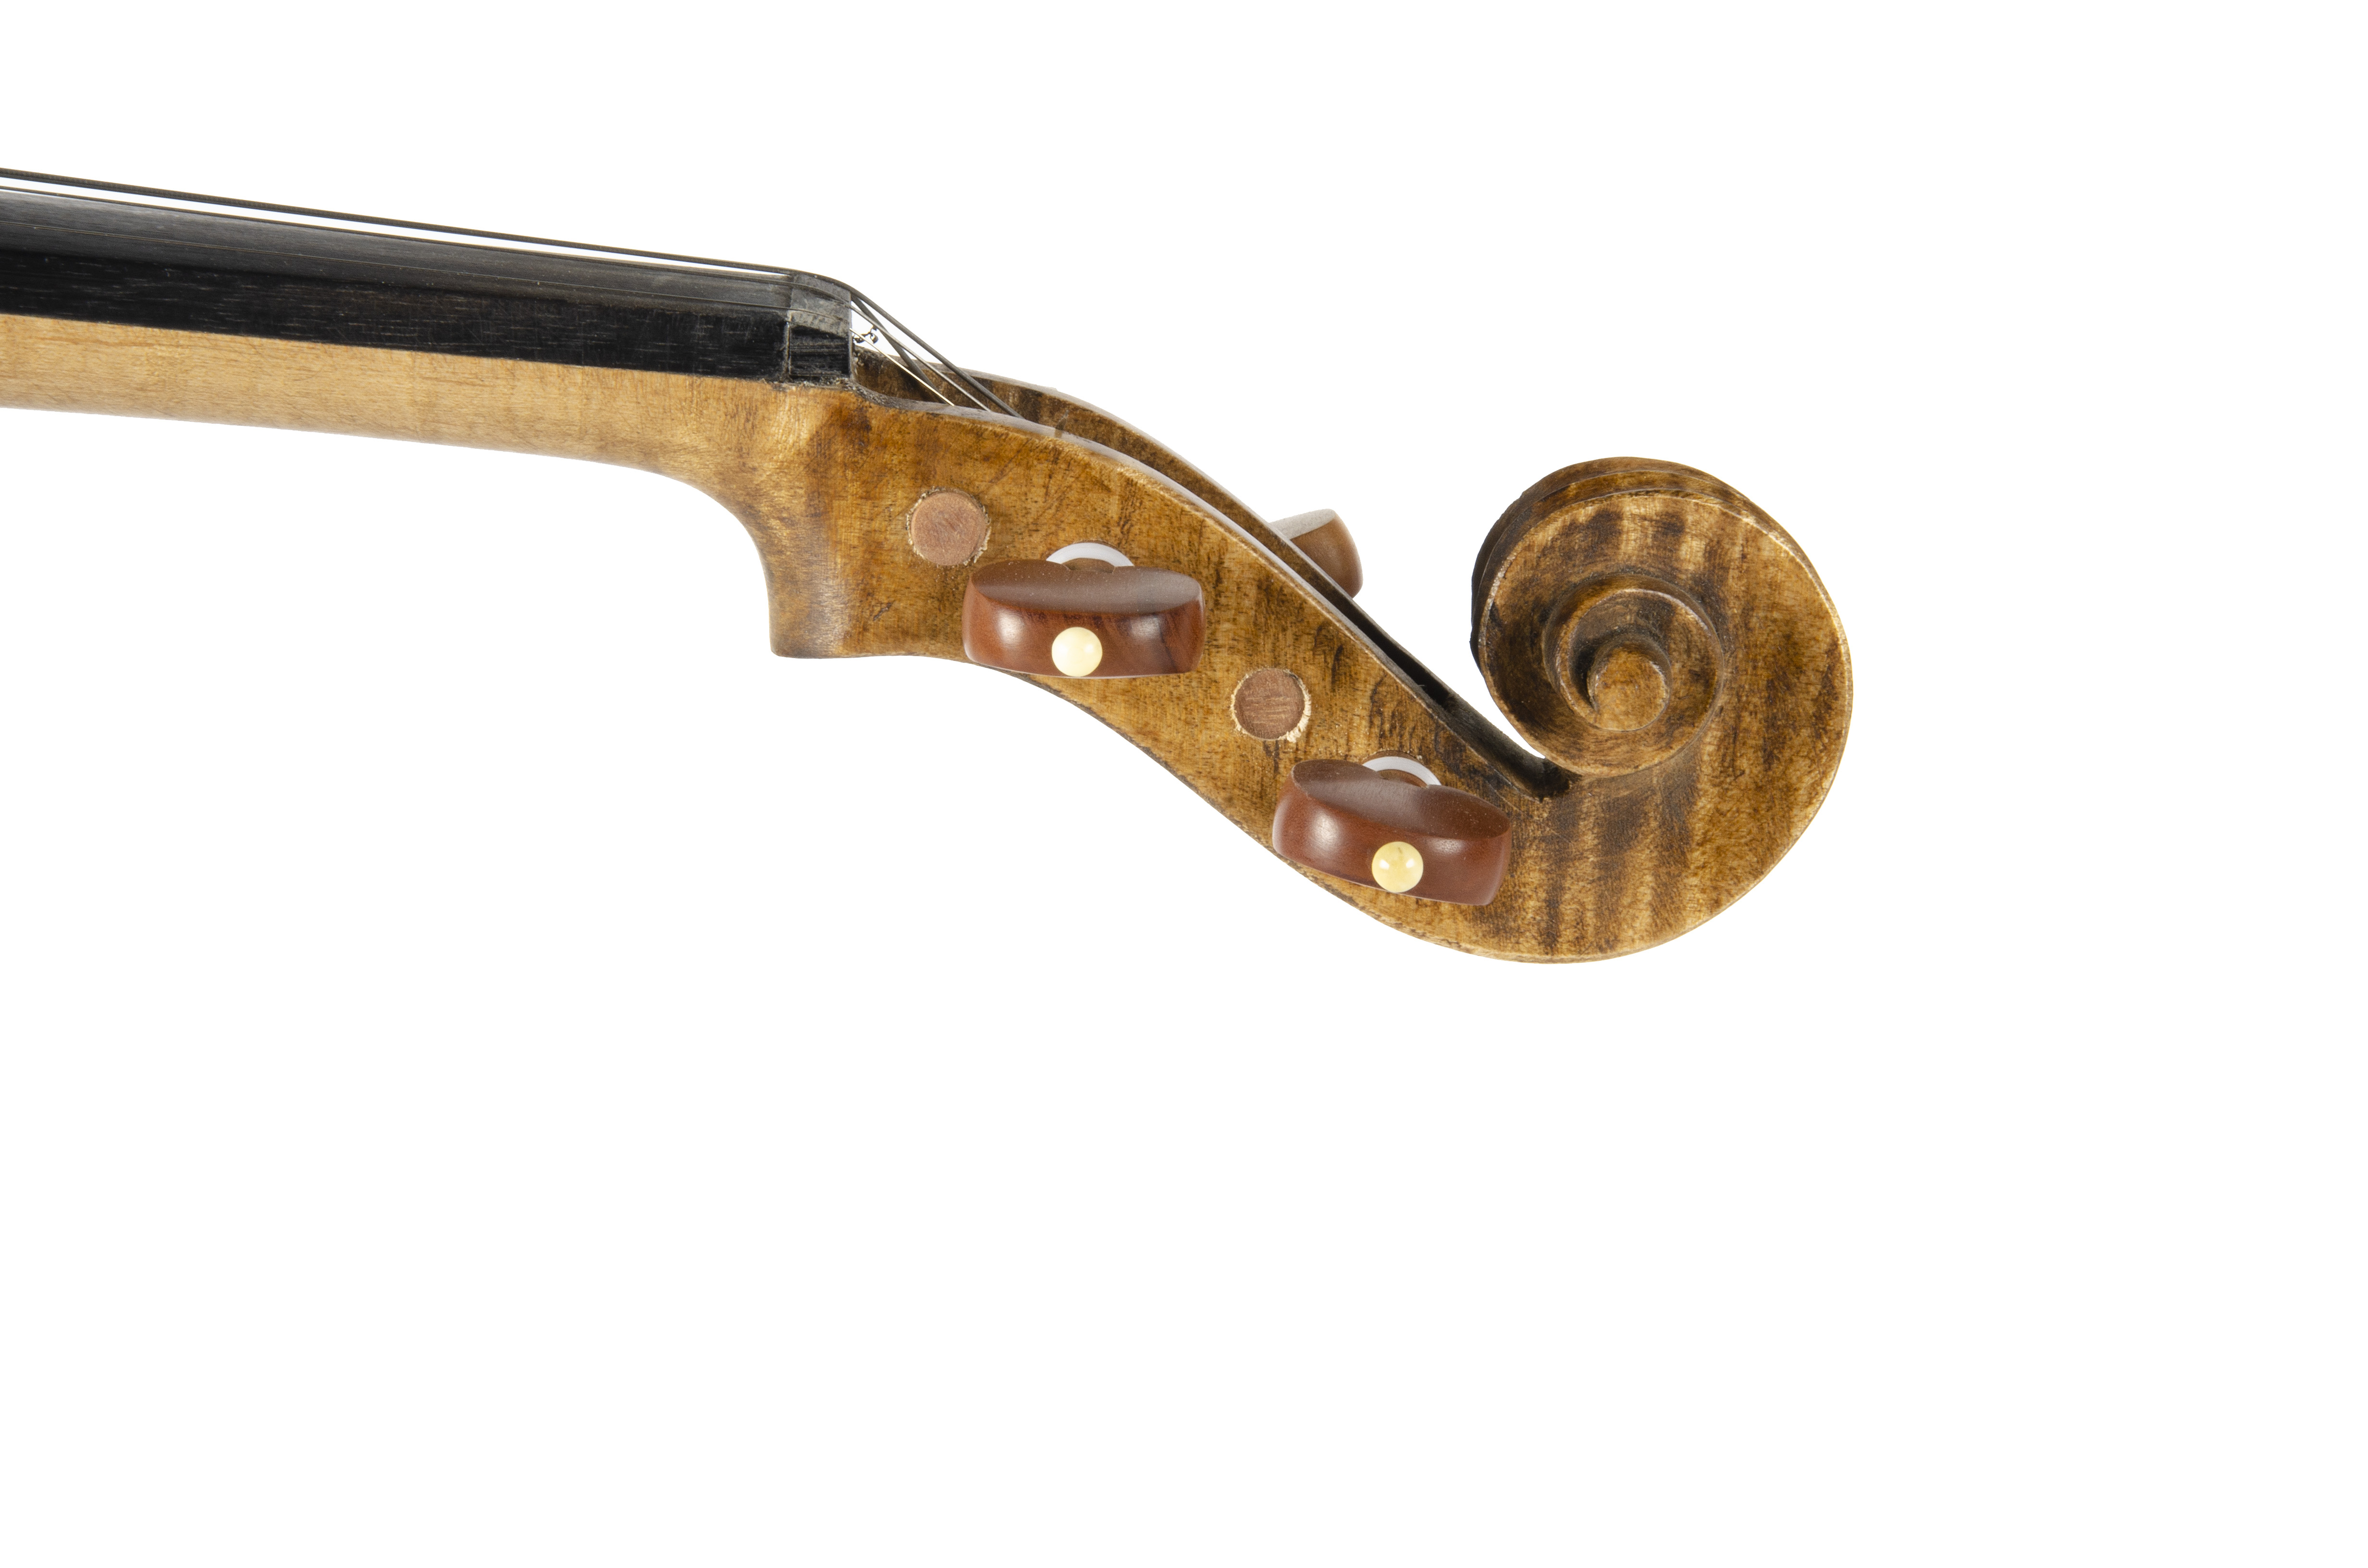 Violin, contemporary unusual-shape violin with back purfling design, no maker's name apparent, - Image 2 of 3